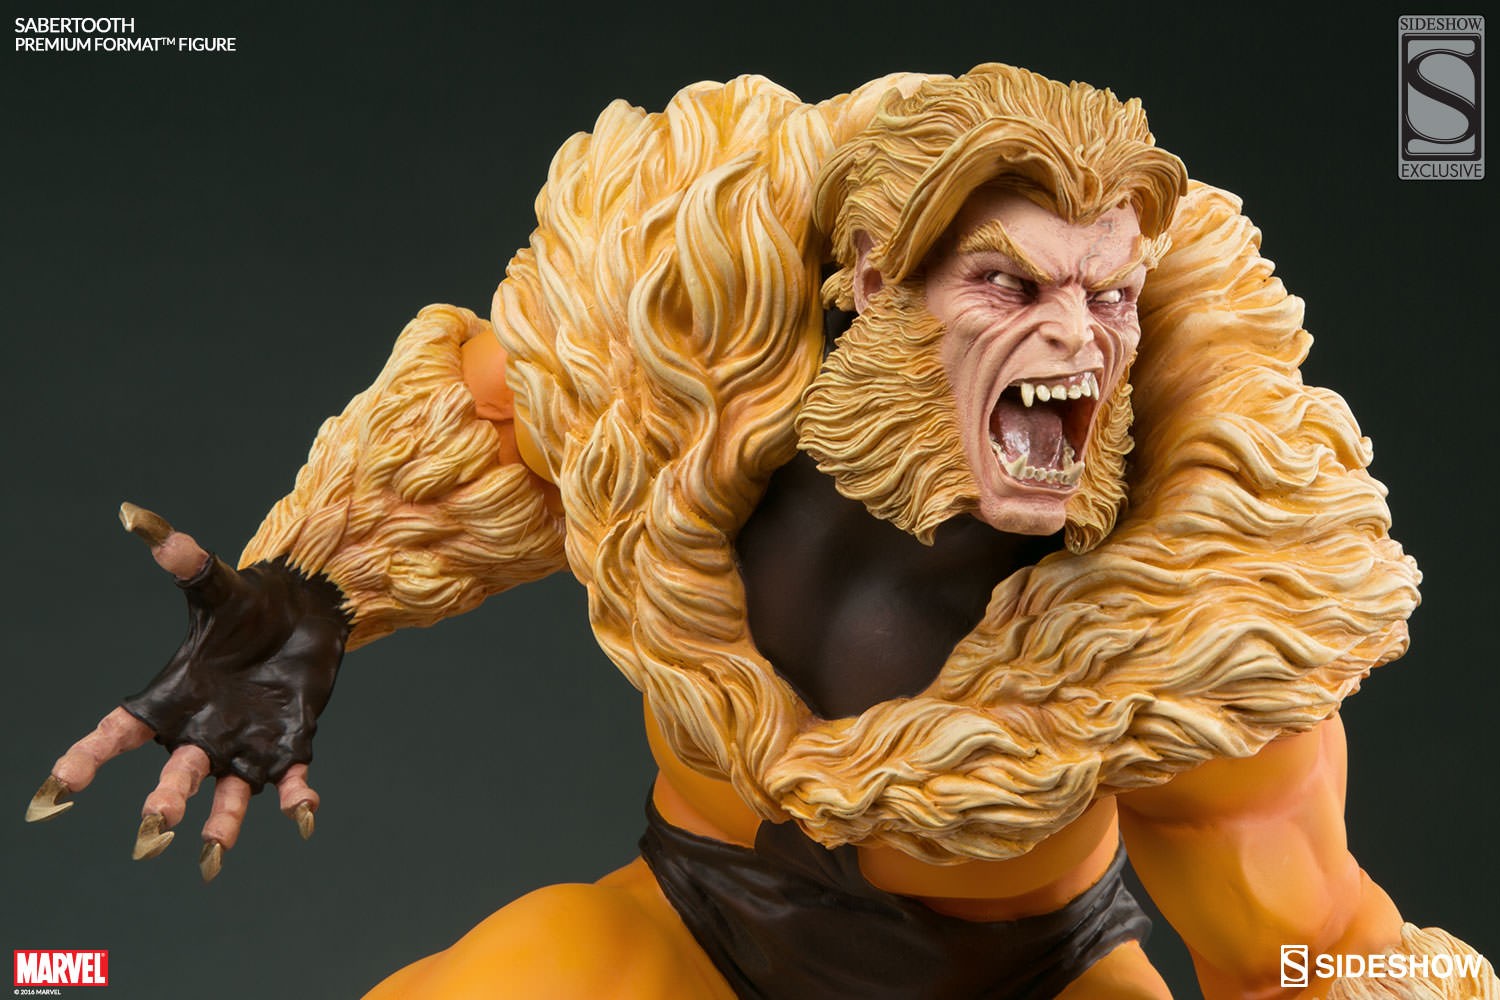 Sabretooth Classic Exclusive Edition View 3